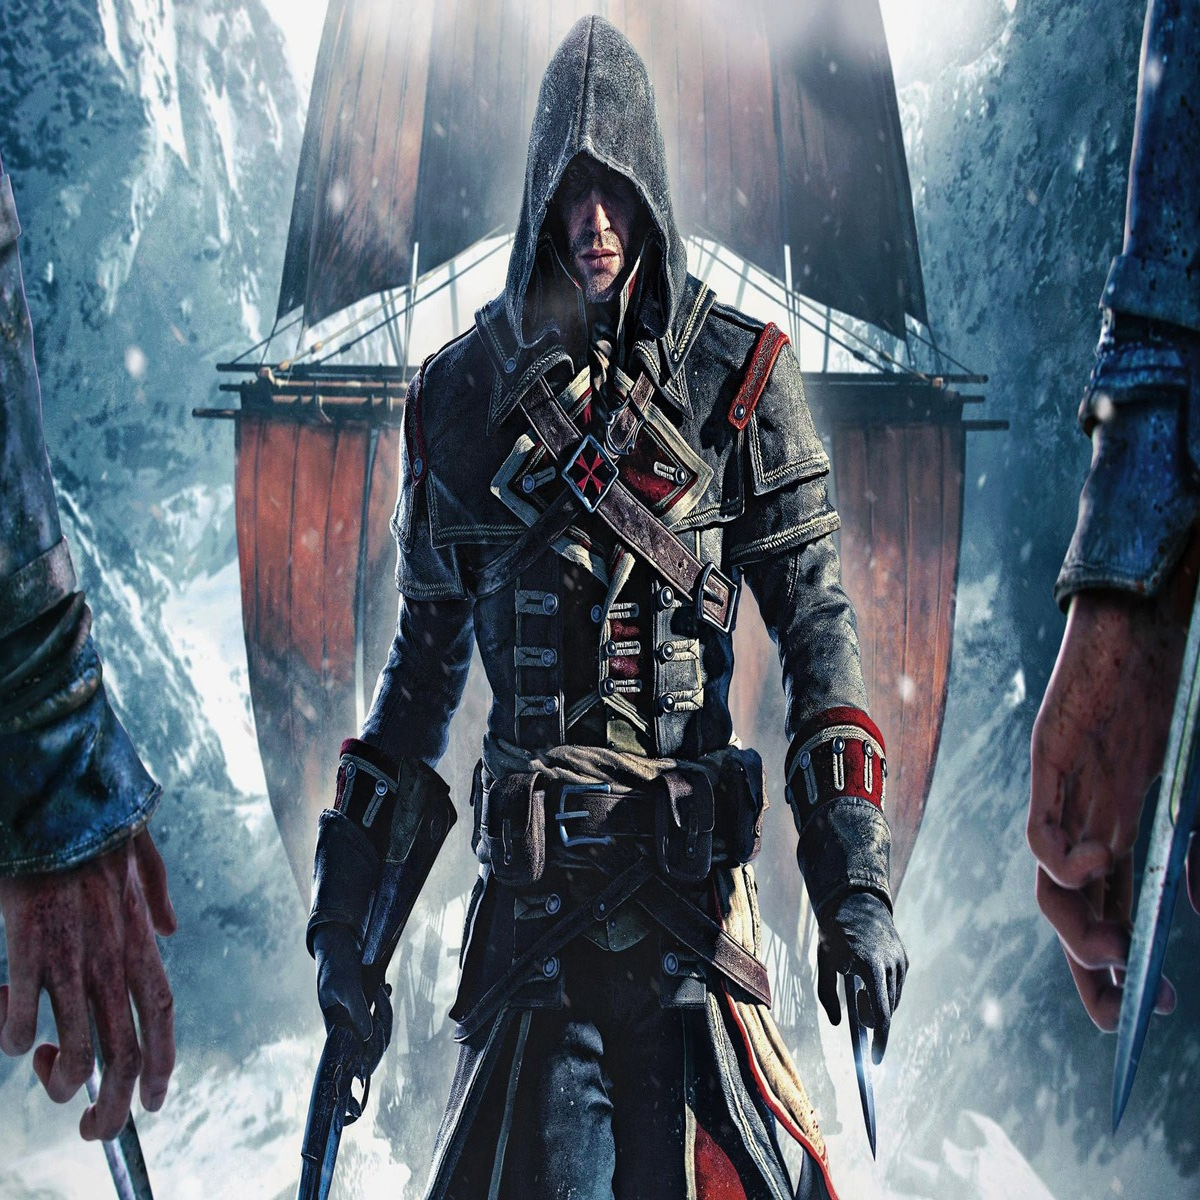 How To Know Whether To Play Assassin's Creed Rogue Remastered